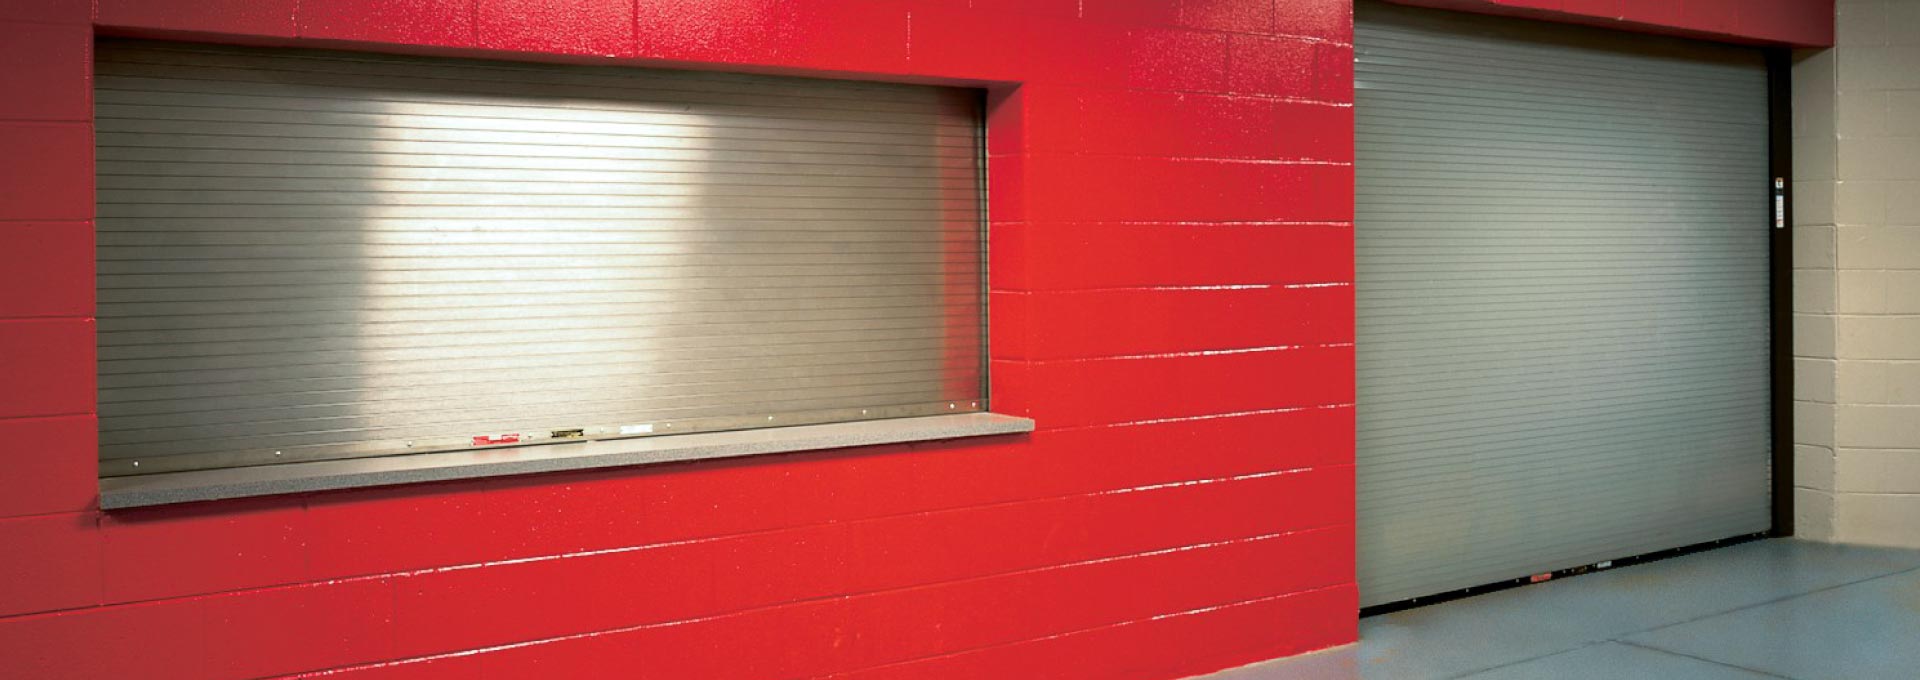 Wide array of rolling steel doors to demanding fire-safety standards and discerning aesthetic requirements